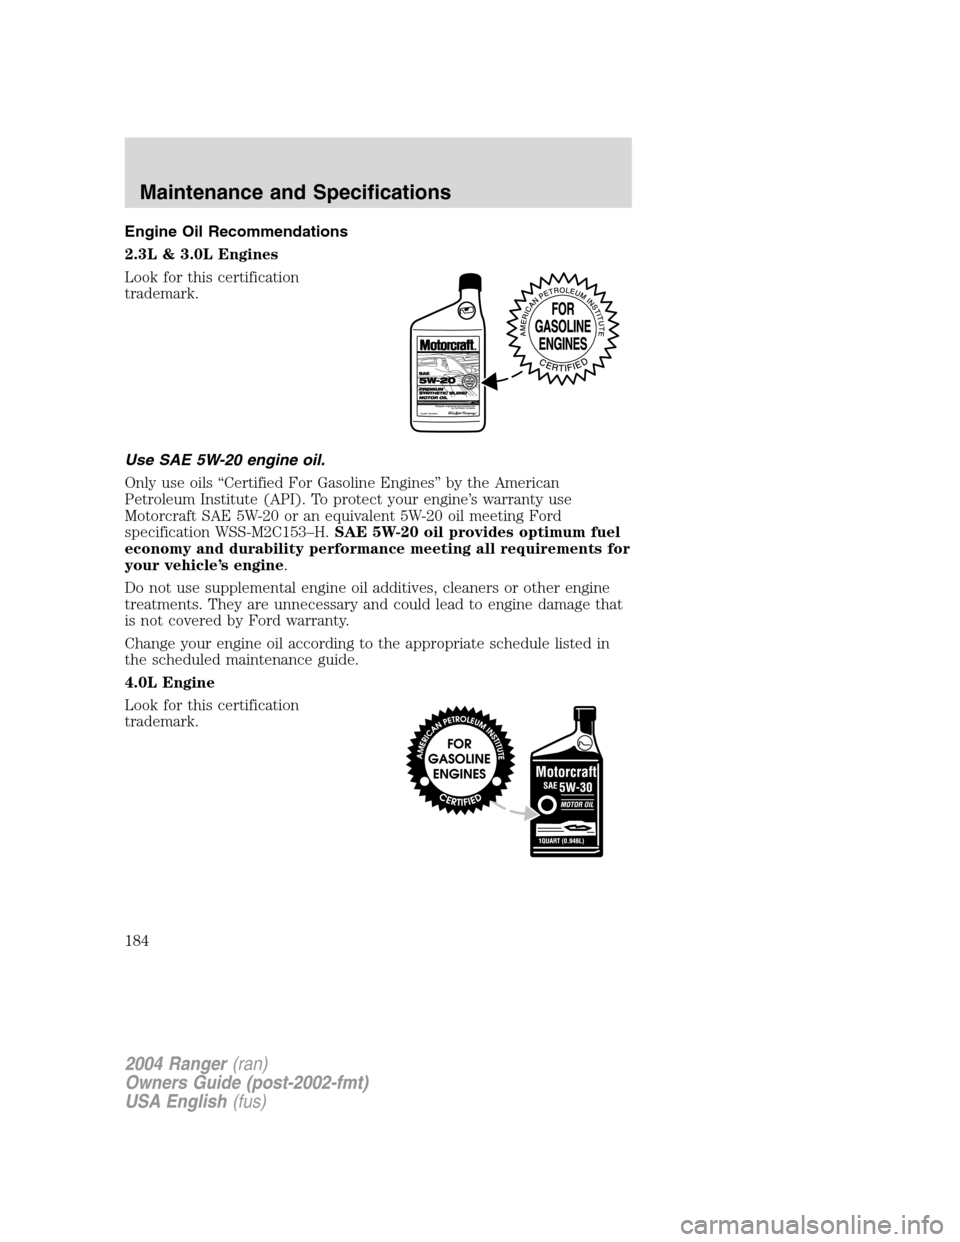 FORD RANGER 2004 2.G Repair Manual Engine Oil Recommendations
2.3L & 3.0L Engines
Look for this certification
trademark.
Use SAE 5W-20 engine oil.
Only use oils“Certified For Gasoline Engines ”by the American
Petroleum Institute (A